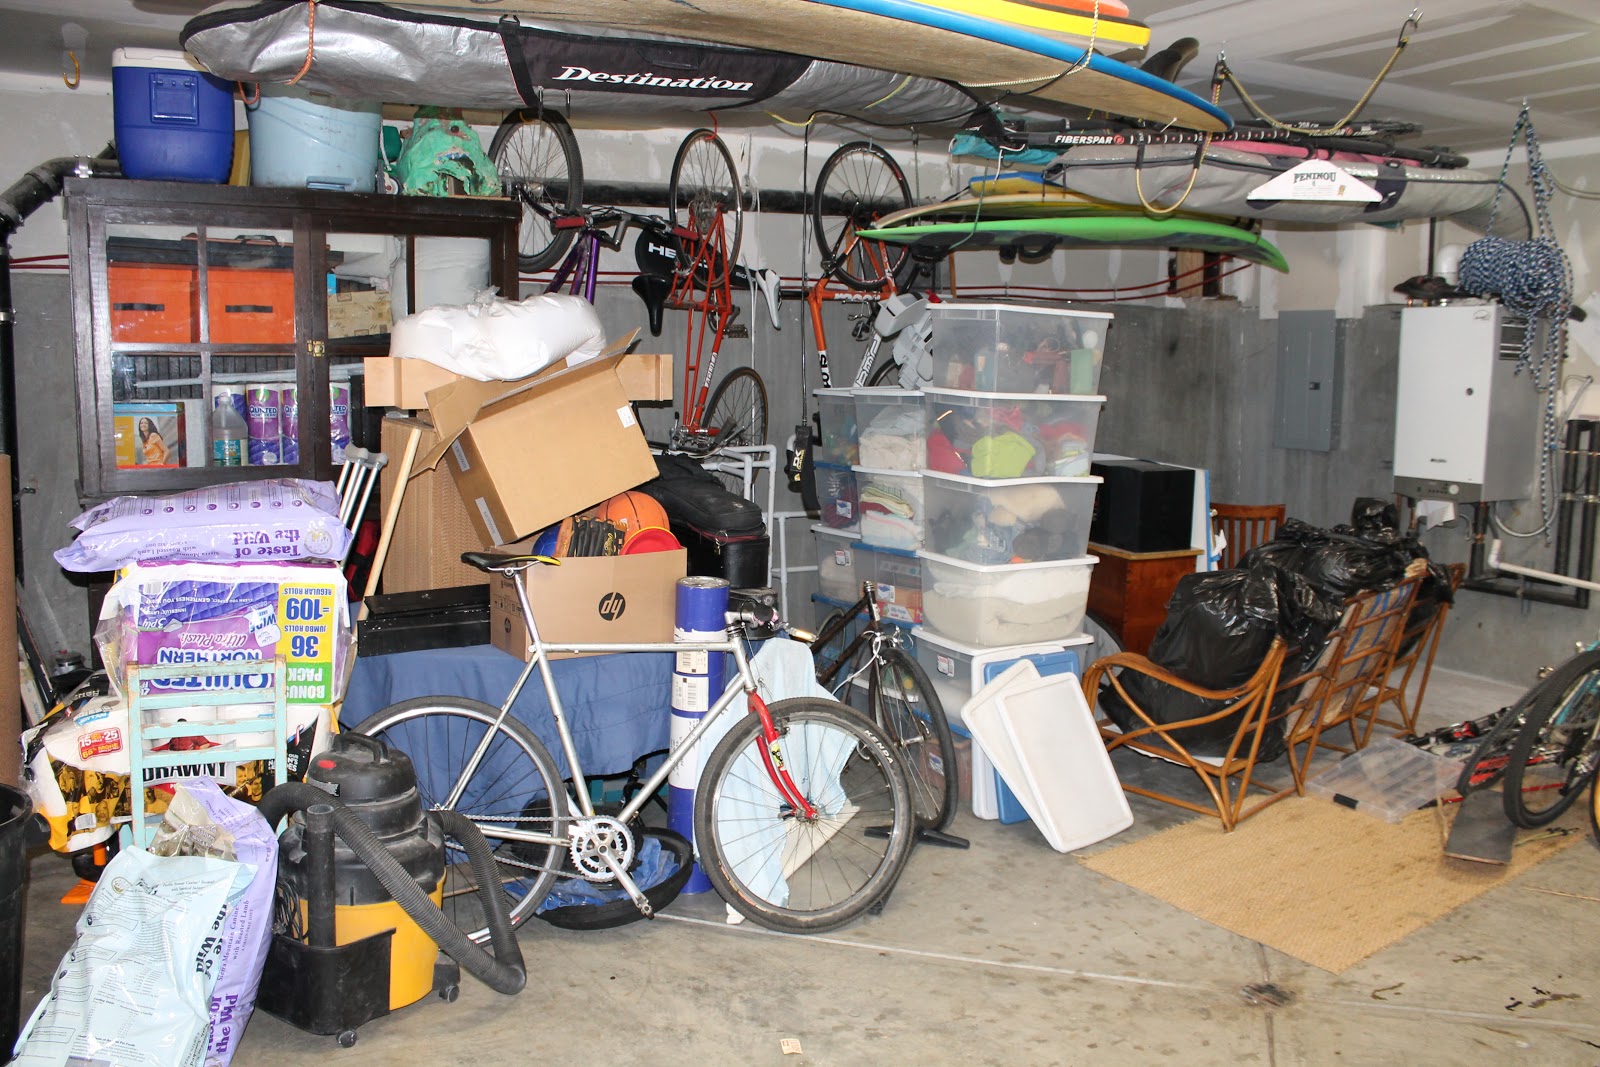 How to Solve Your Clutter Problems with Storage for the Garage